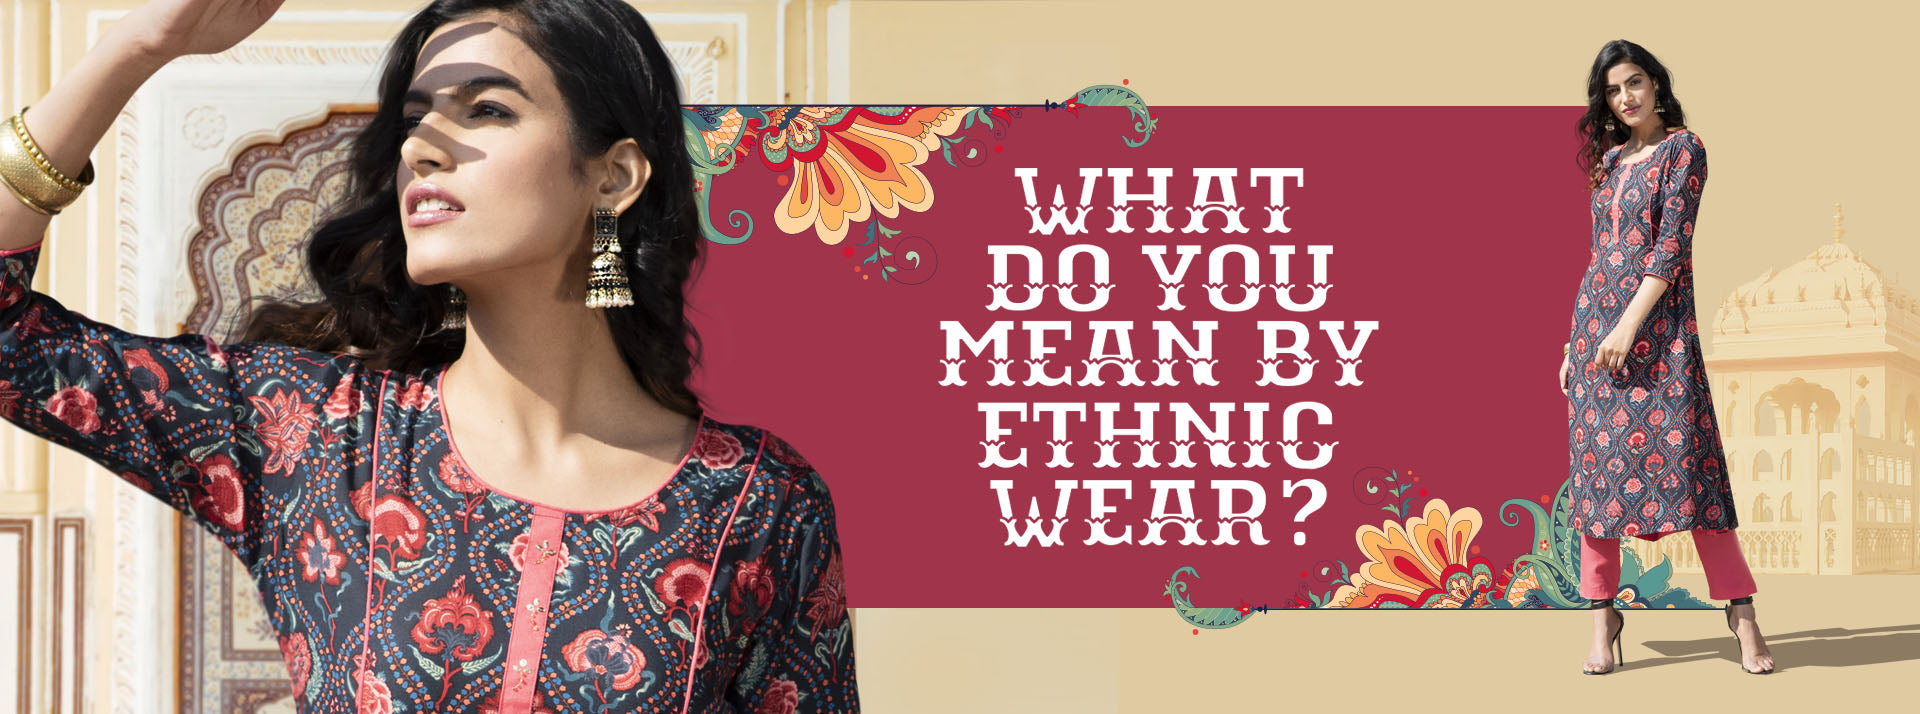 What Do You Mean by Ethnic Wear